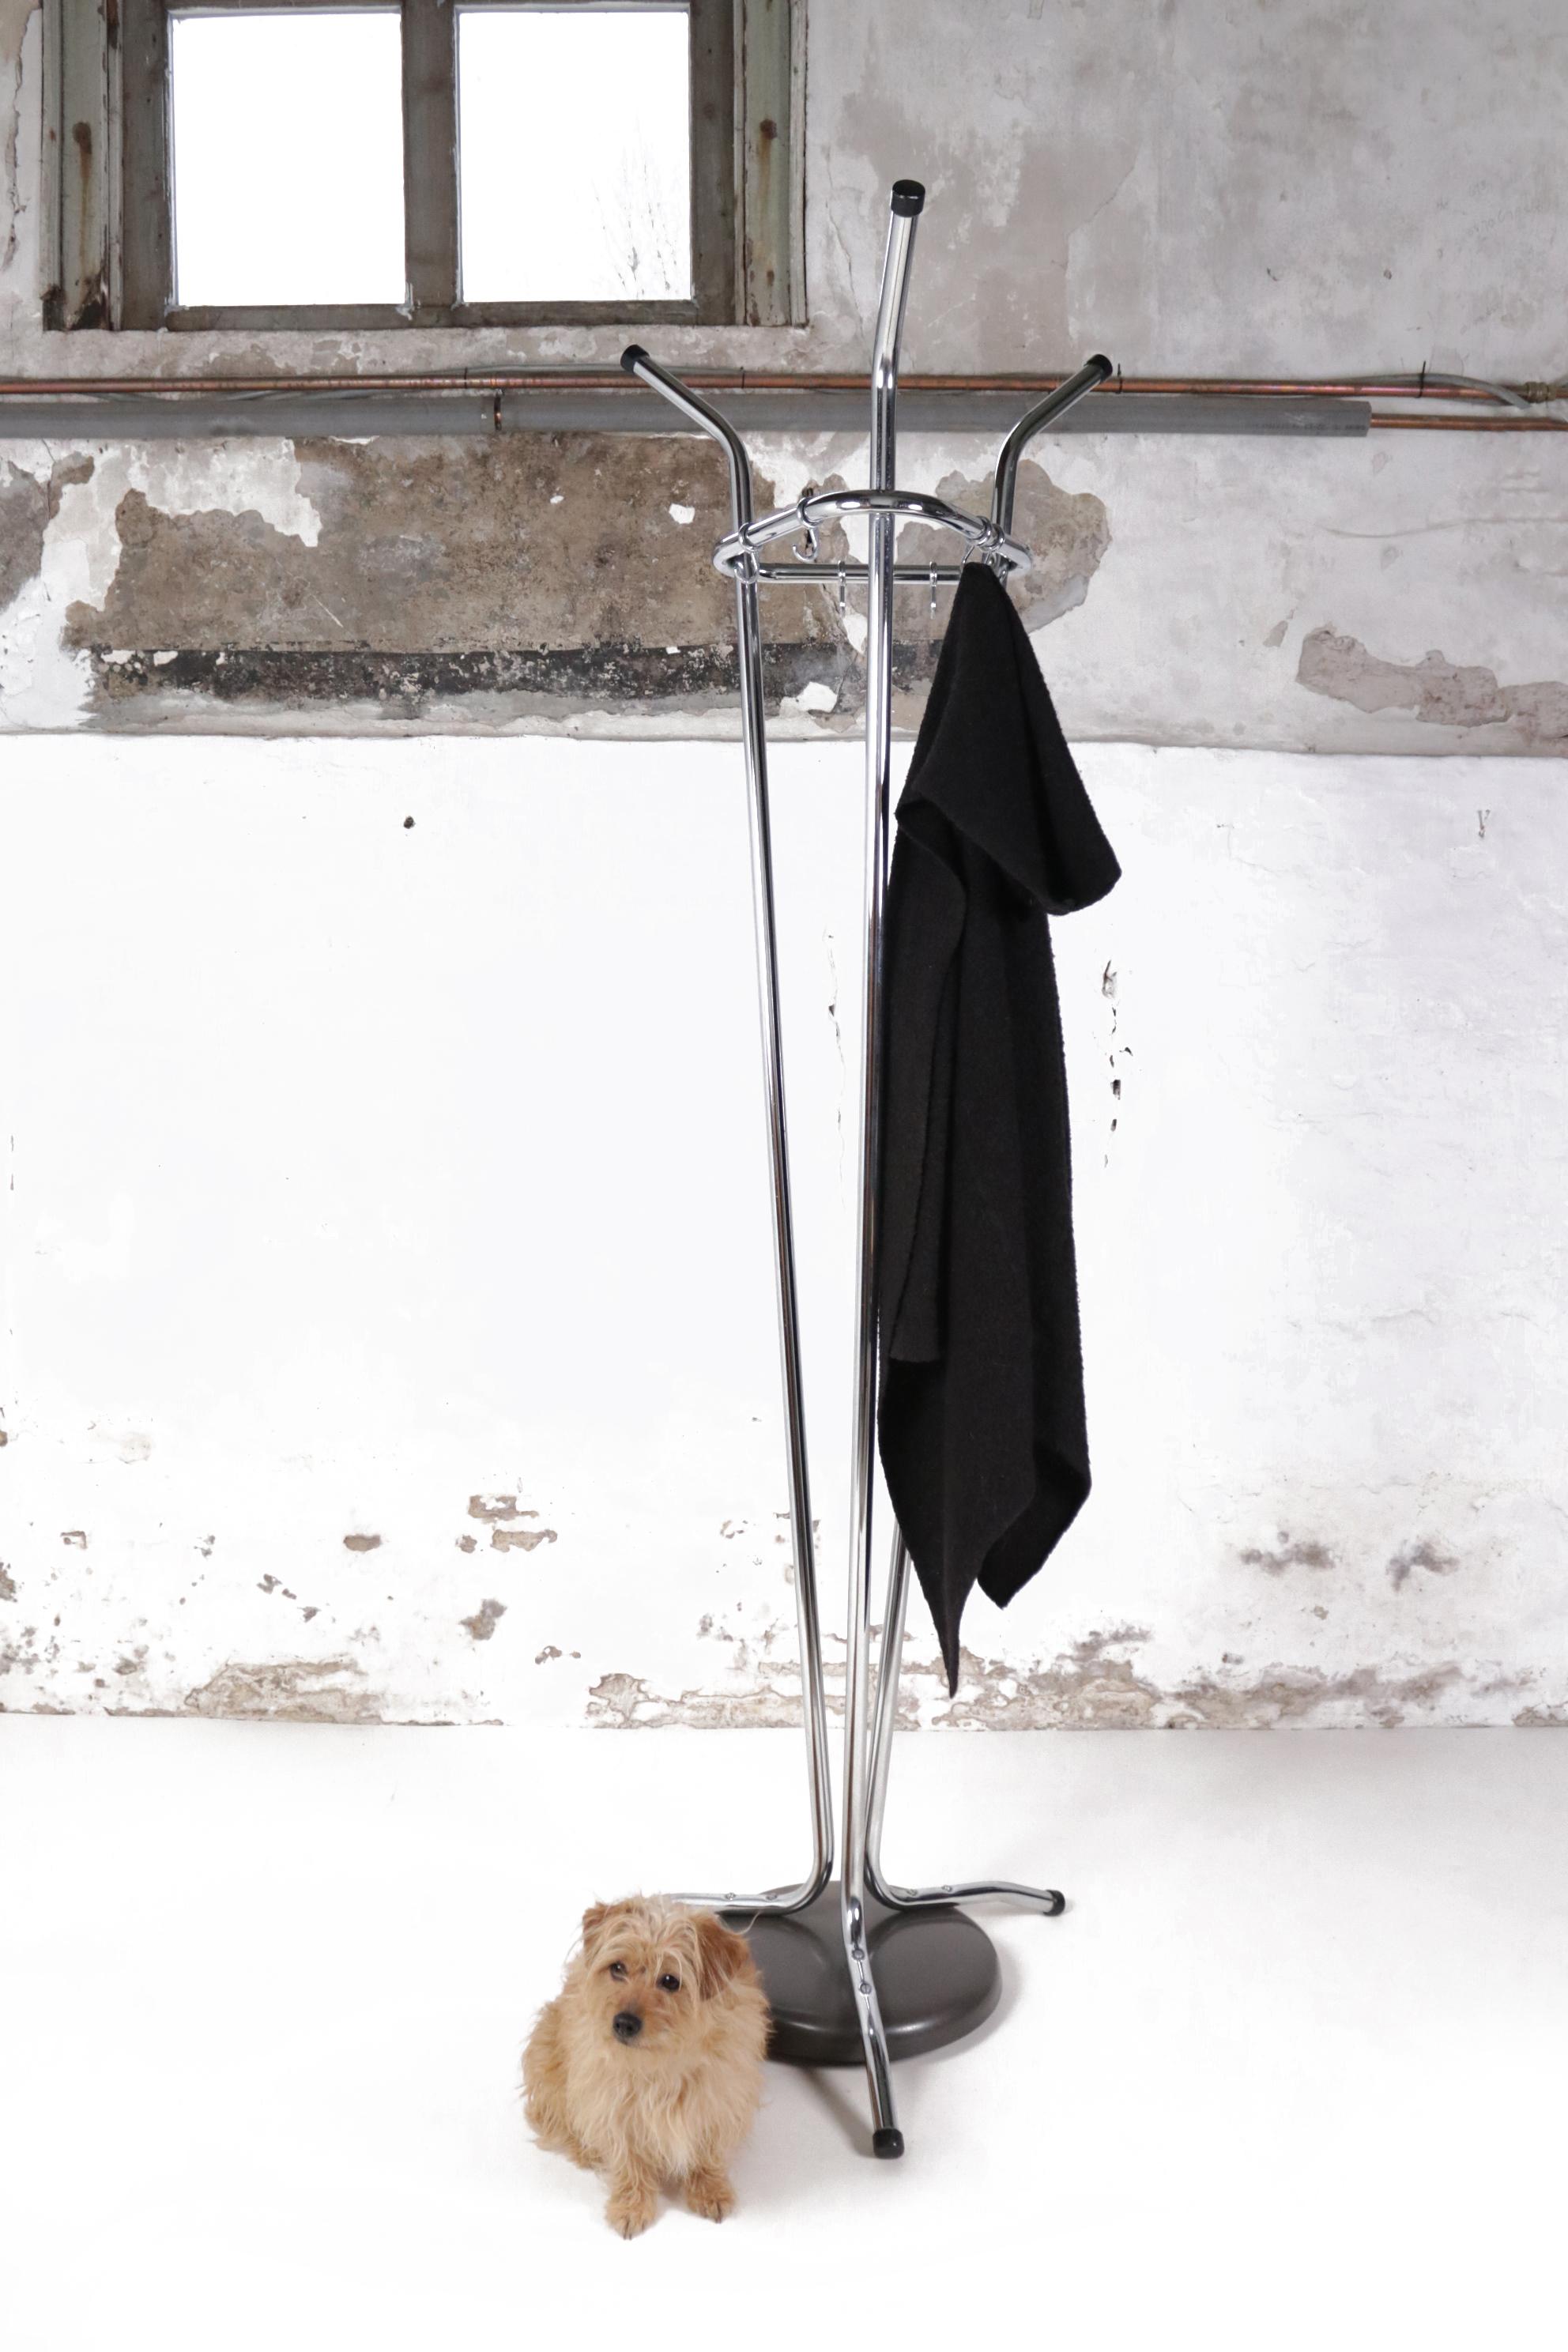 Beautiful coat-rack probably made by Tubax or Gispen in the 70s.
Three chrome tube arms creating a triangular freestanding coat rack with 6 hooks in original condition with minimal wear.